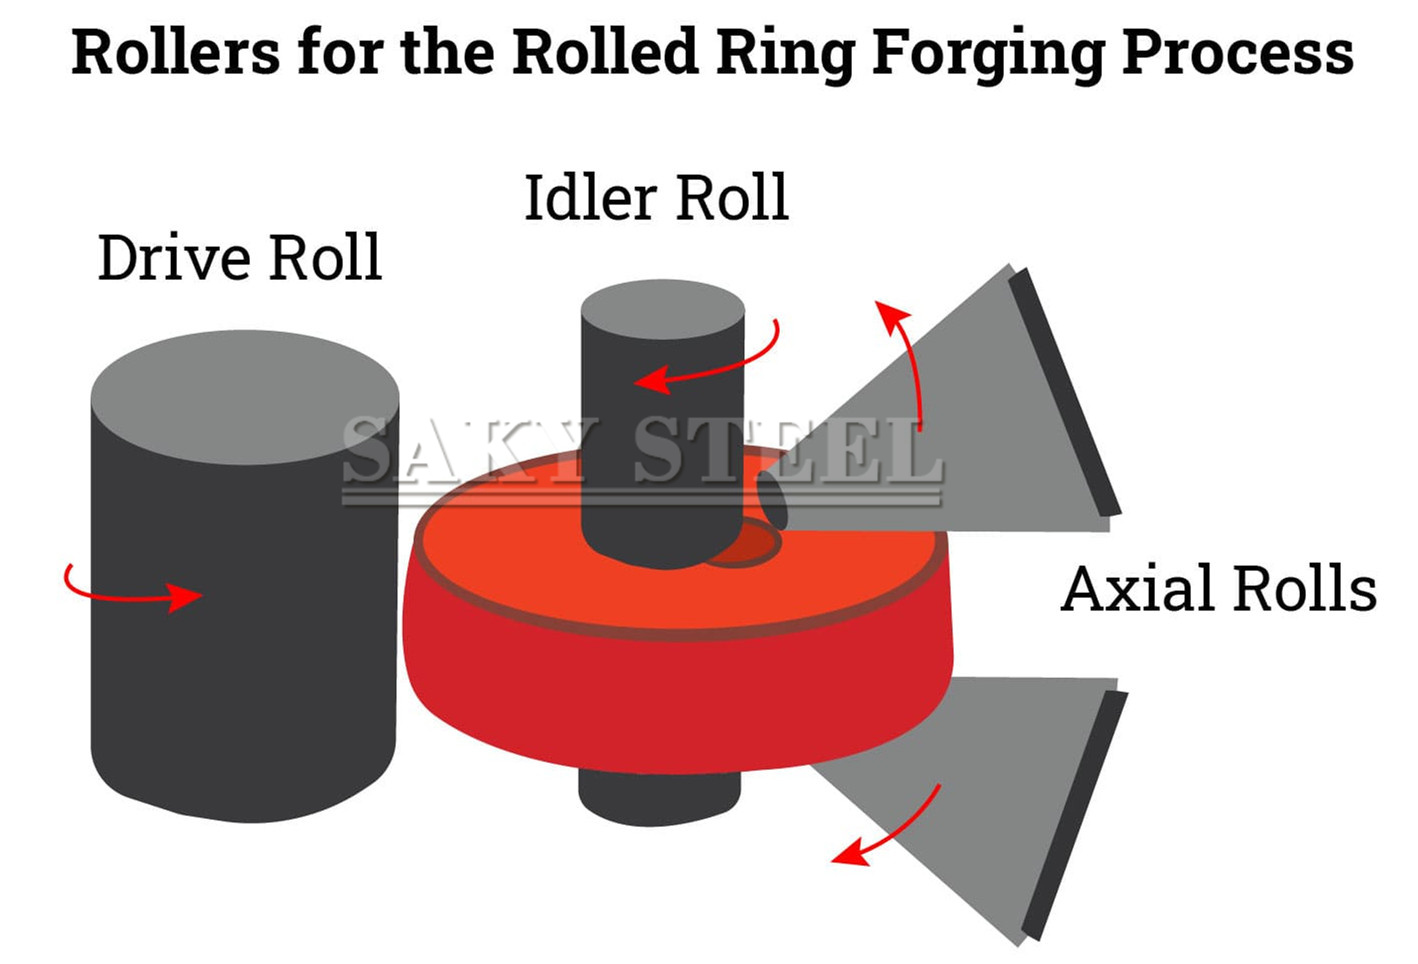 rollers-for-the-rolled-ring-forging-process